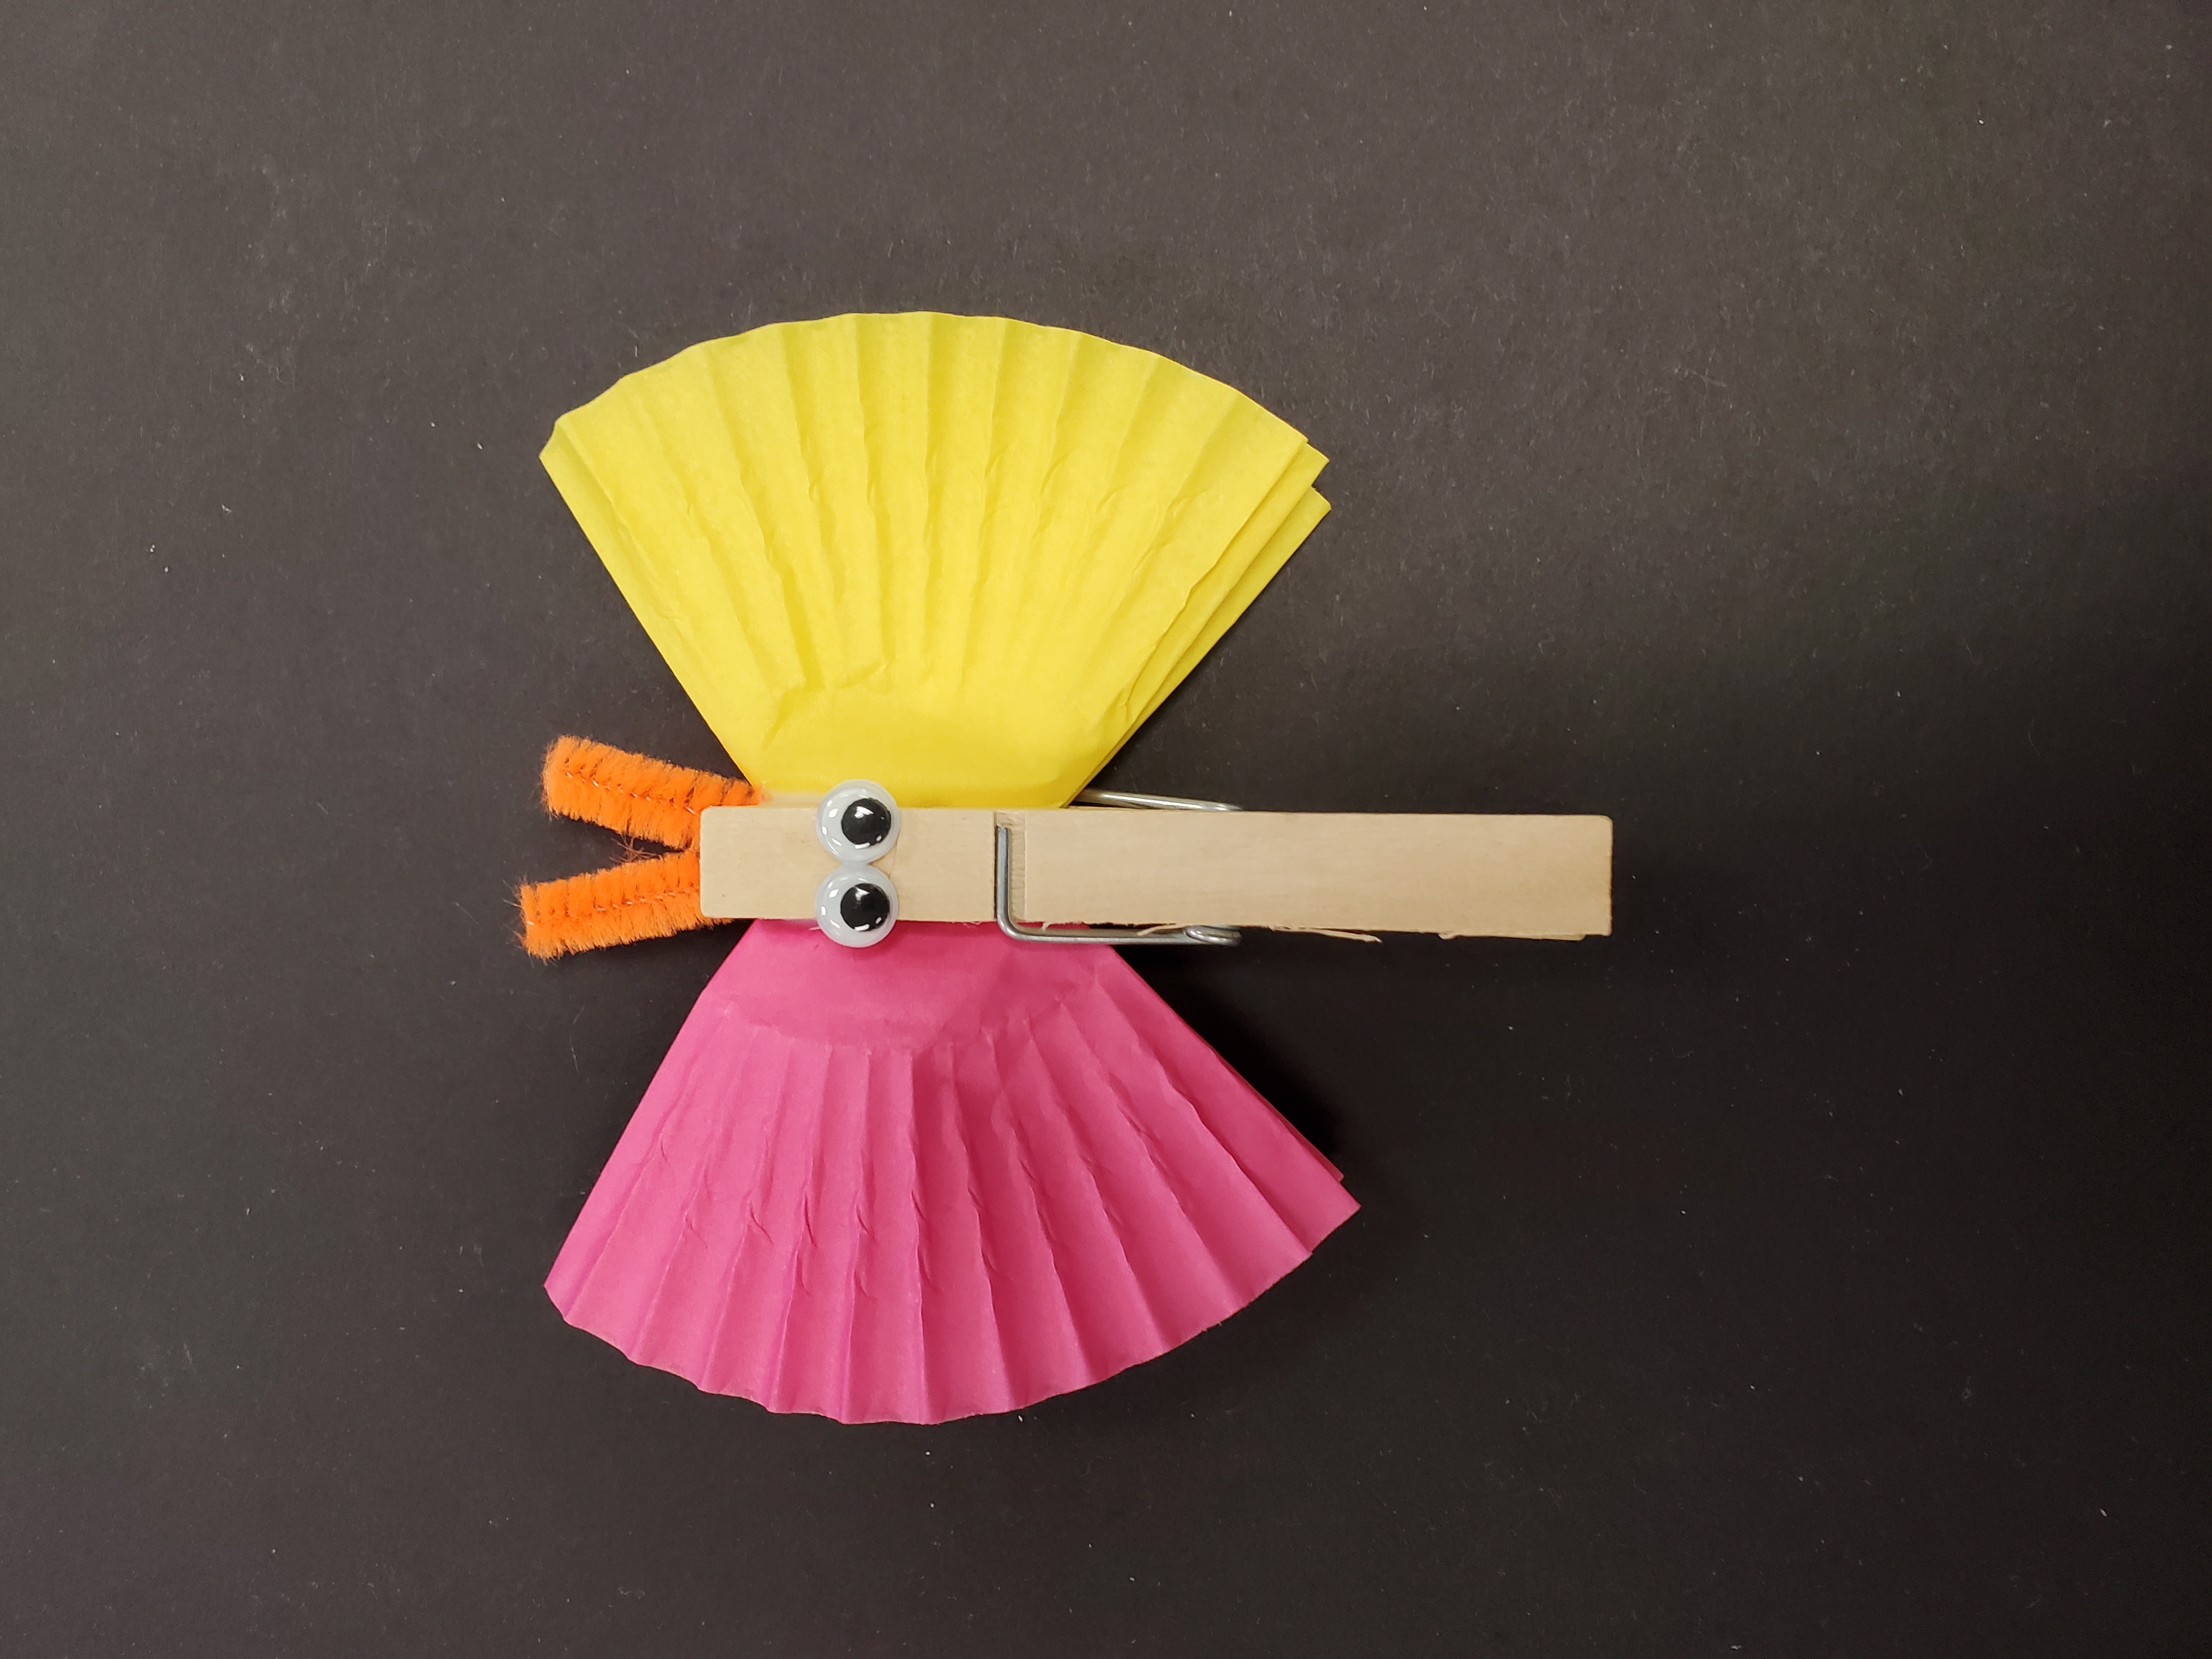 Image of a clothes pin with two colorful cupcake liners folded into wings (one wing is pink and one is yellow). On the clothes pin there are two googly eyes, and two orange antennae made out of pipecleaners. The background of this image is black.